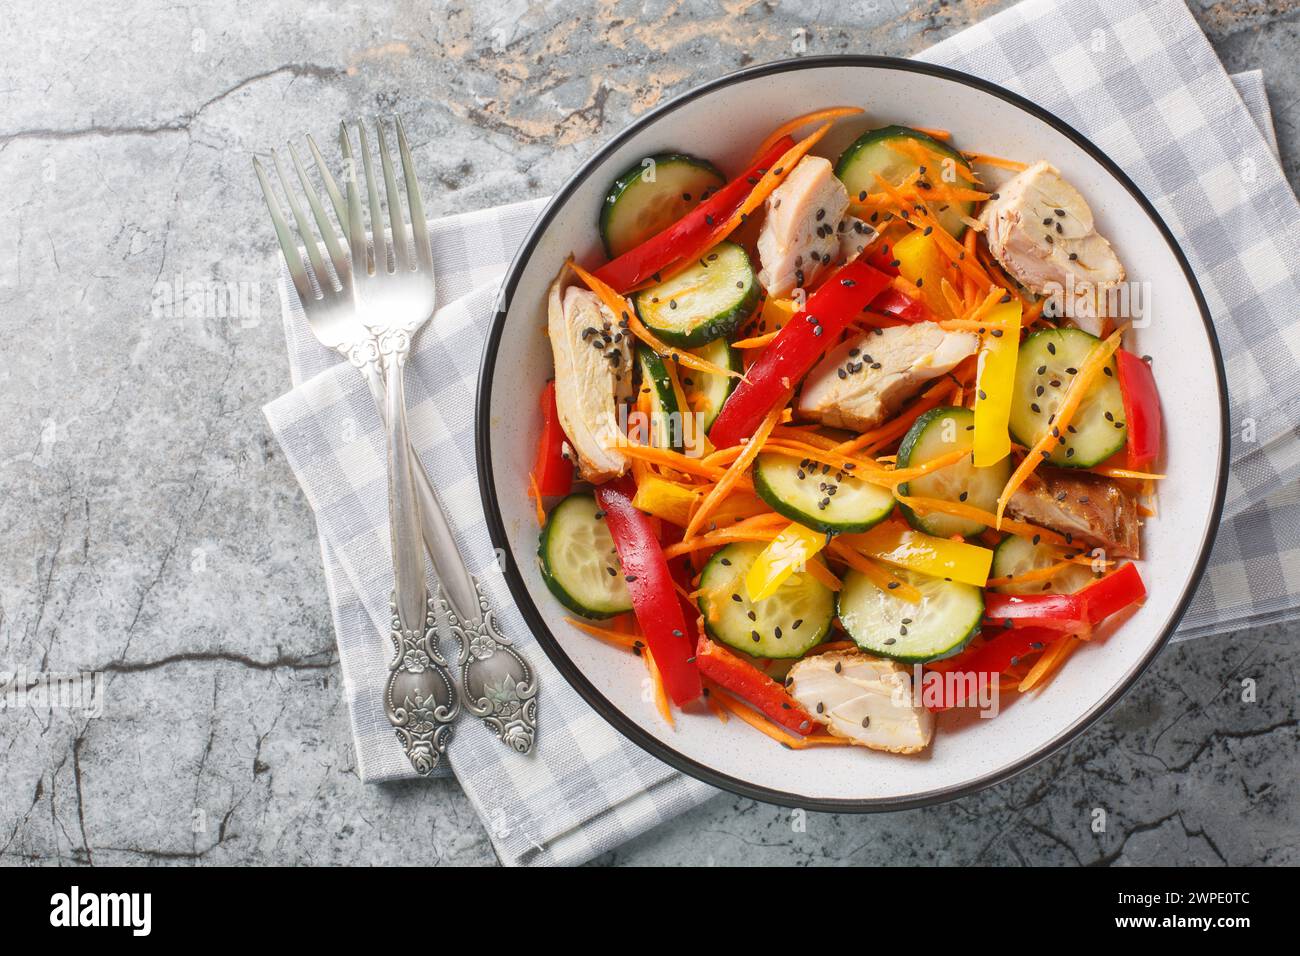 Vitamin salad with baked chicken, fresh cucumbers, bell peppers, carrots and sesame seeds close-up in a bowl on a marble table. Horizontal top view fr Stock Photo